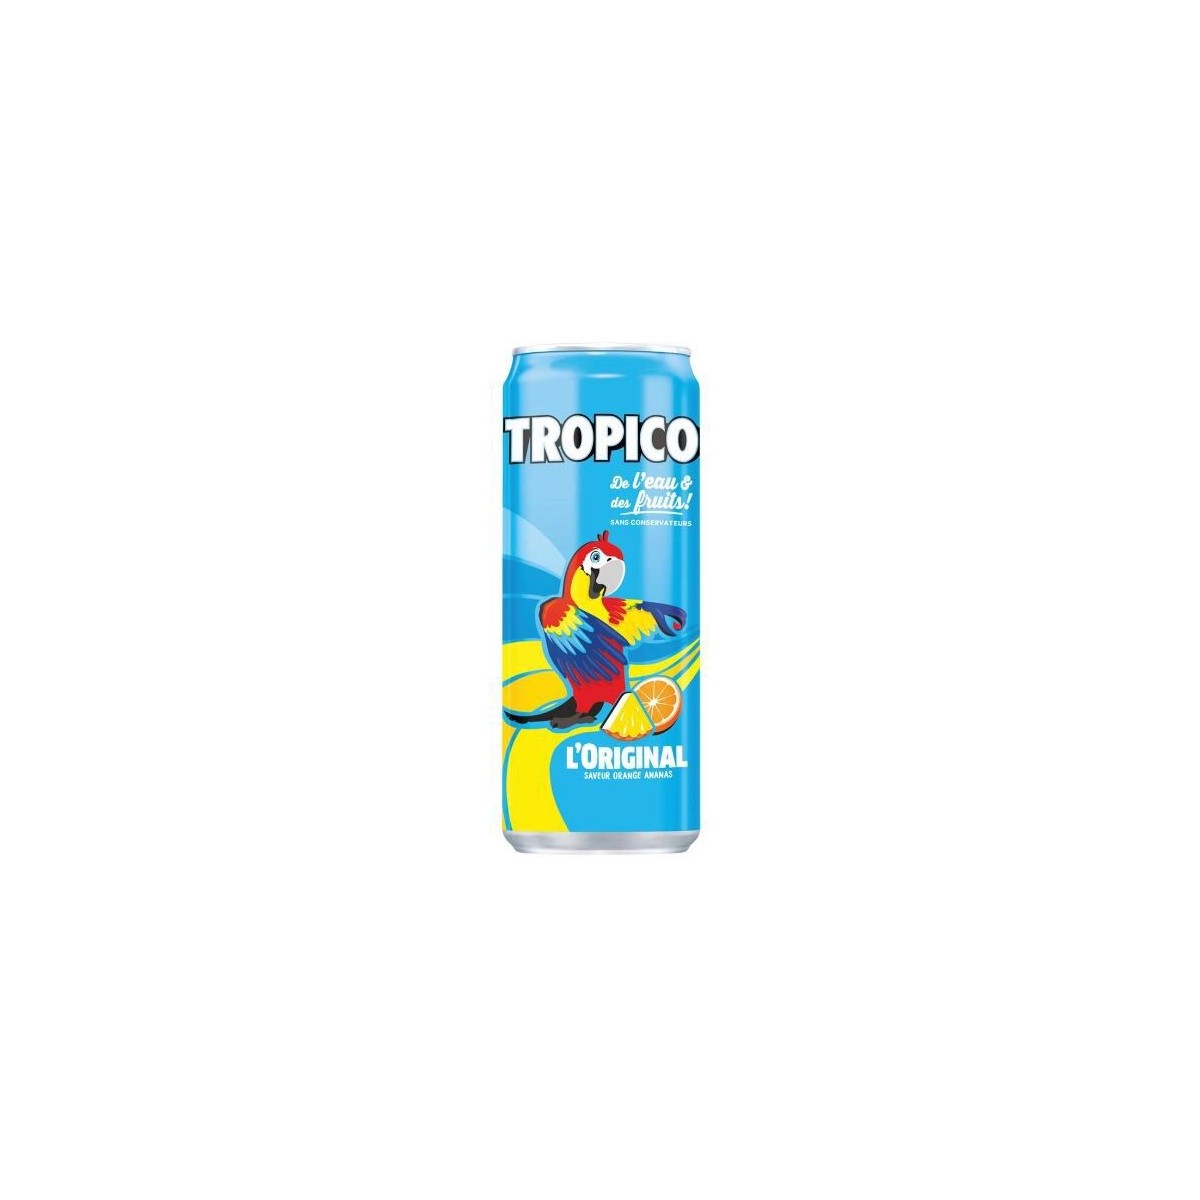 TROPICO EXOTIC 24 X 33CL CAN  TRAY